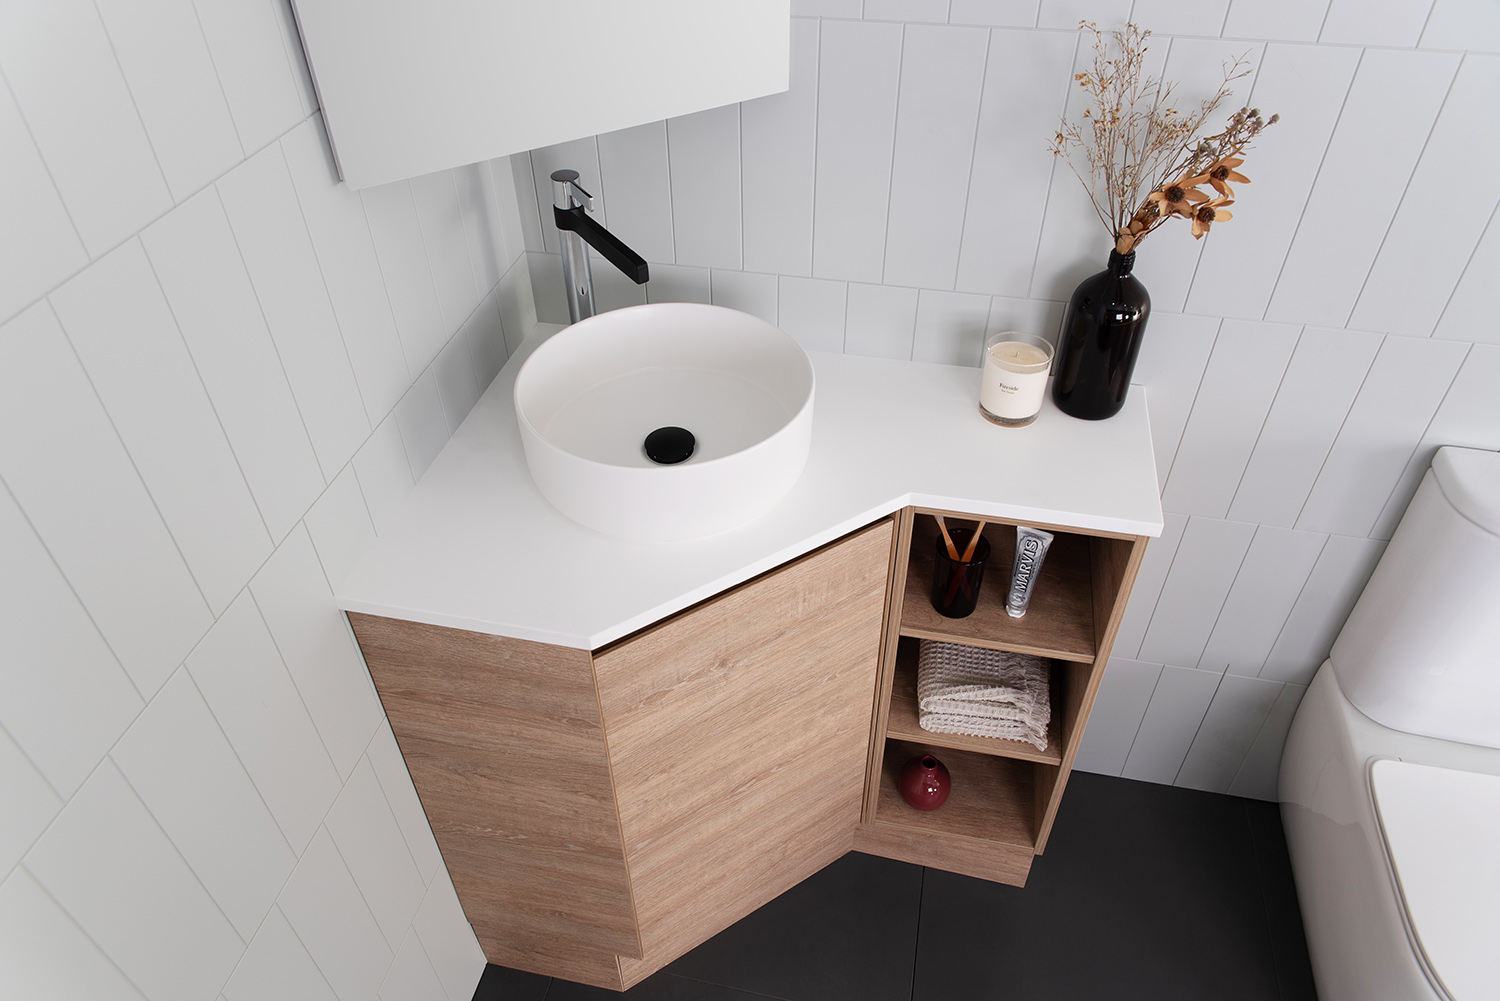 Corner Sink To Save Space in Small Ensuite Bathroom